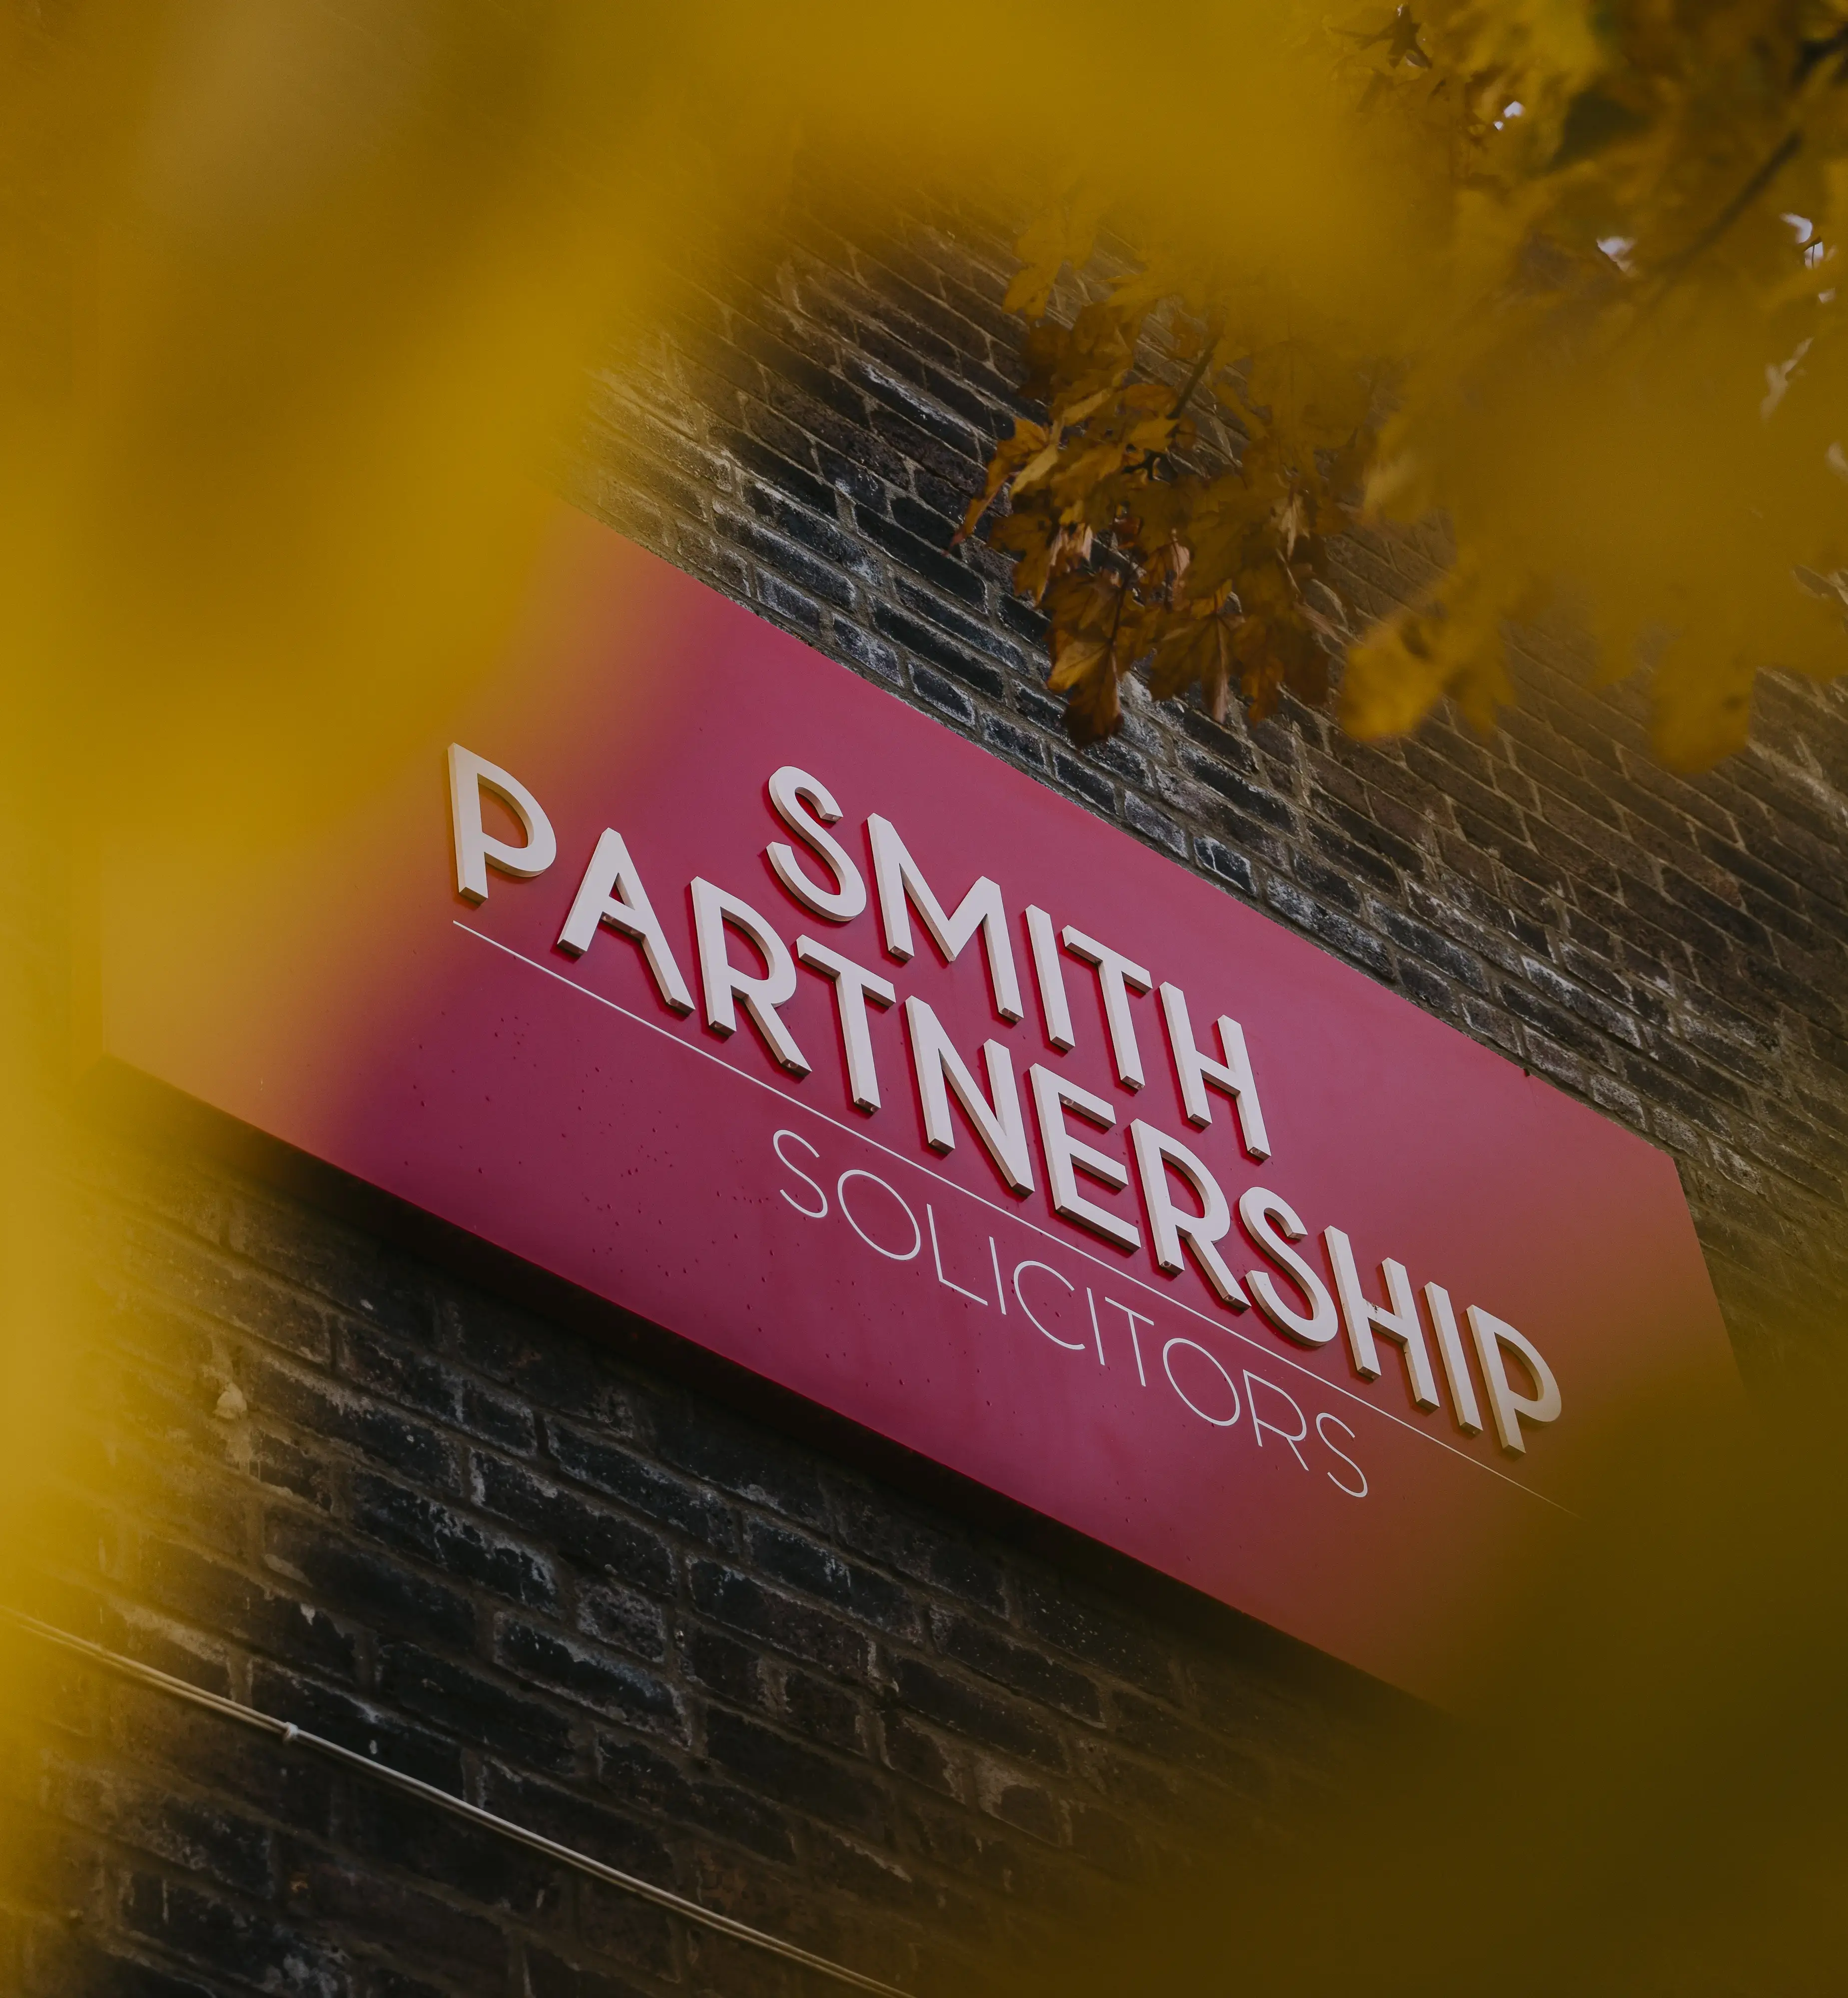 Main contact page, SMITH PARTNERSHIP SOLICITORS